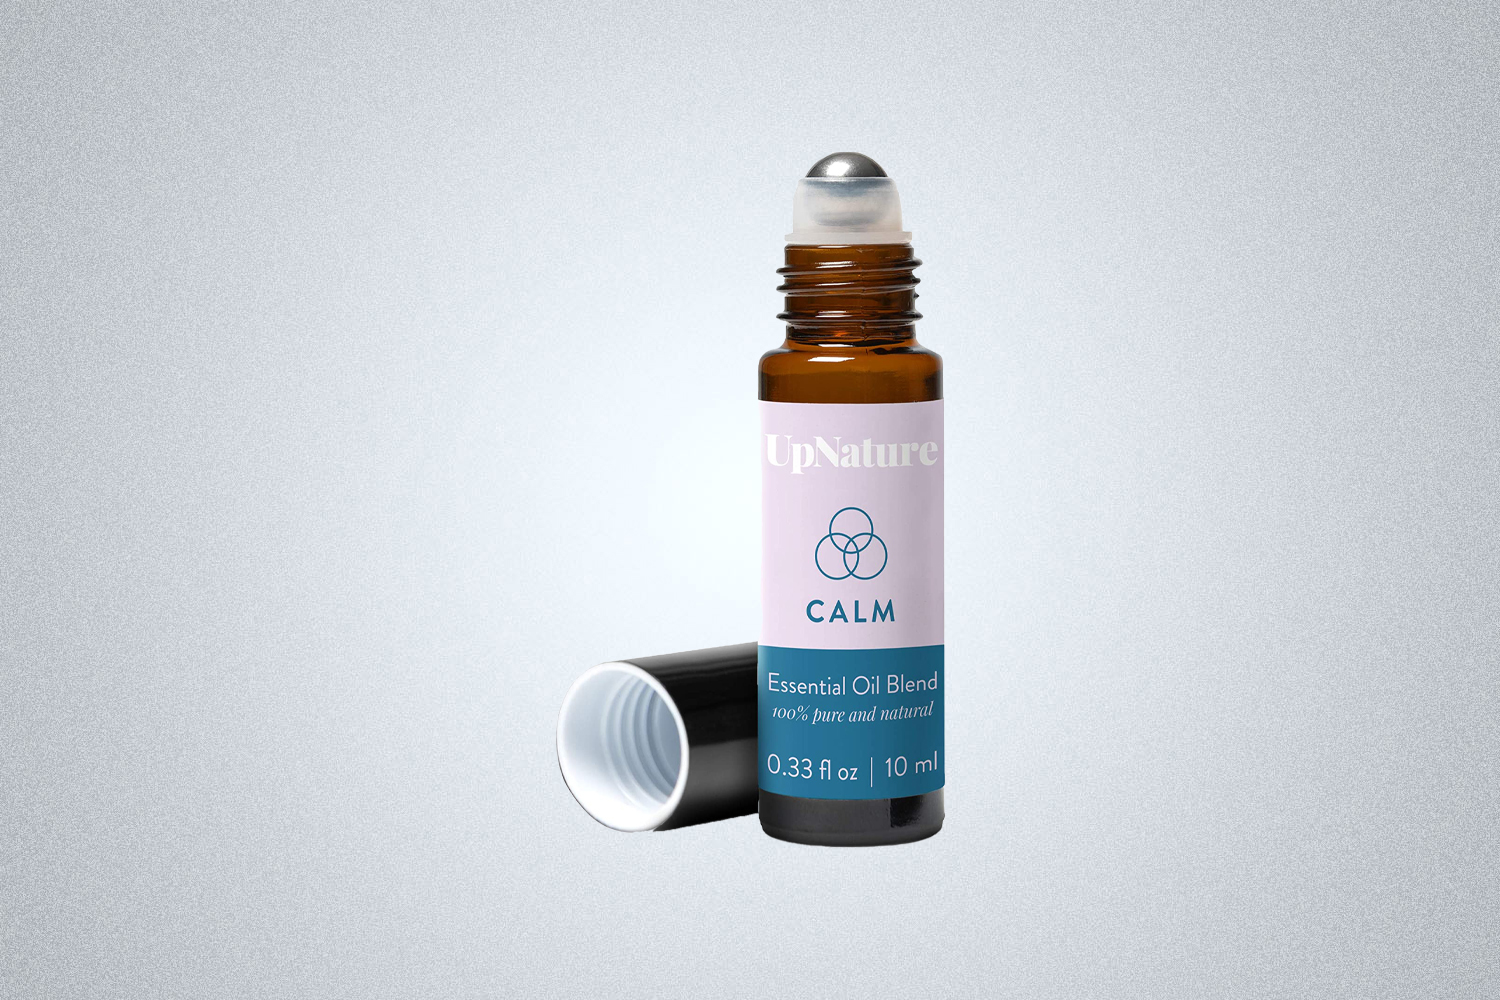 UpNature Calm Essential Oil Blend is one of the best soothing sleep products in 2022